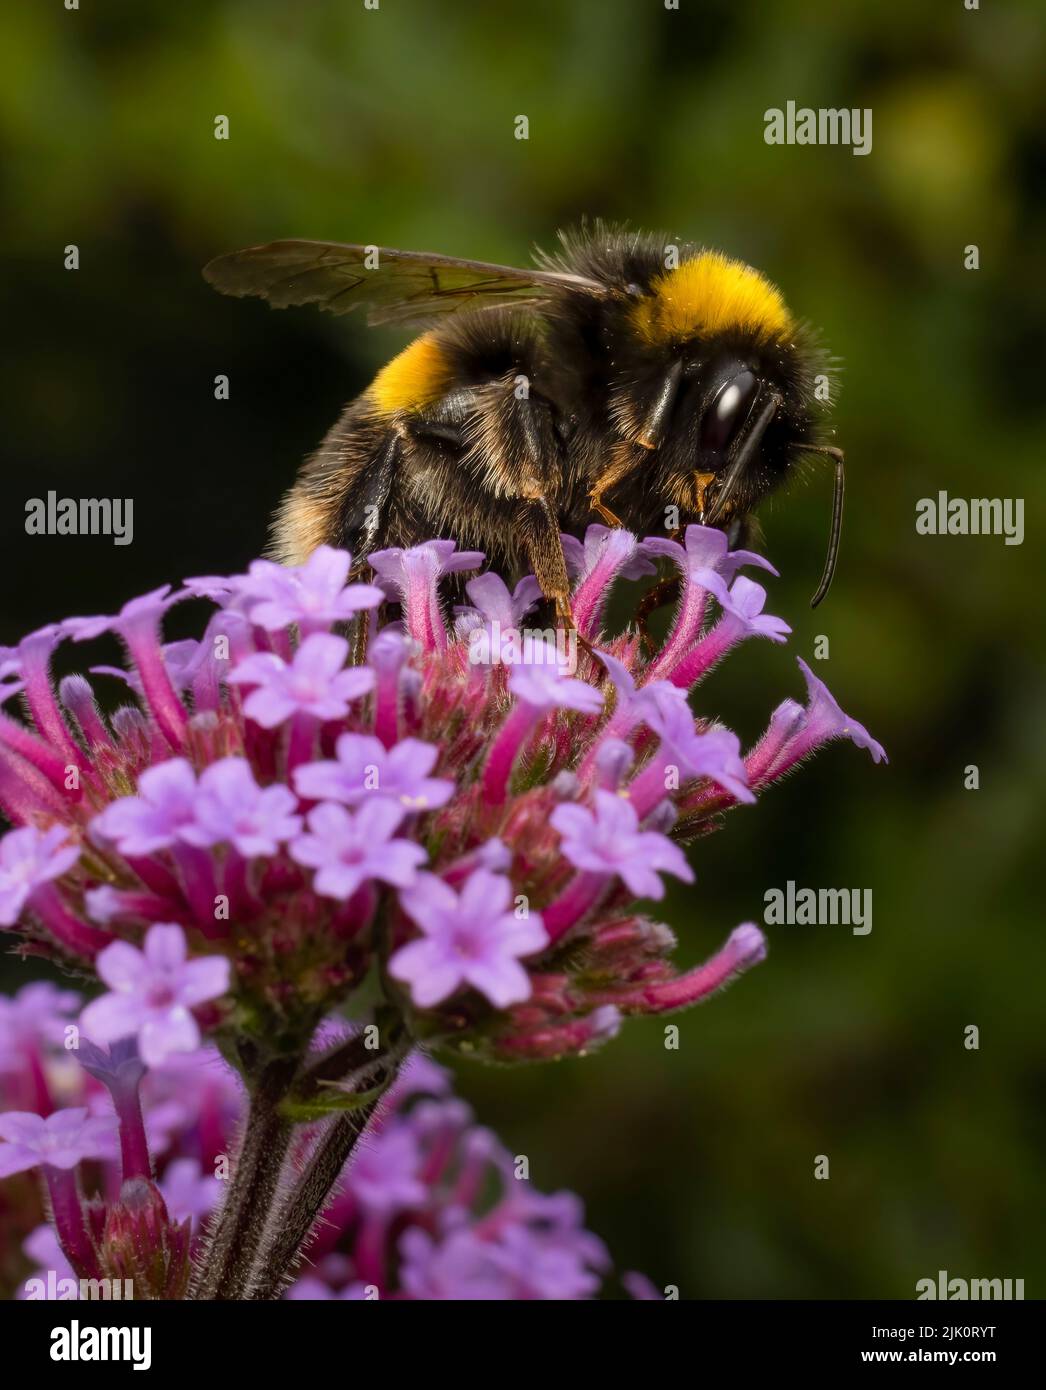 A close upon a WhiteTailed Bumble Bee extracting nectar from a Verbena flower Stock Photo